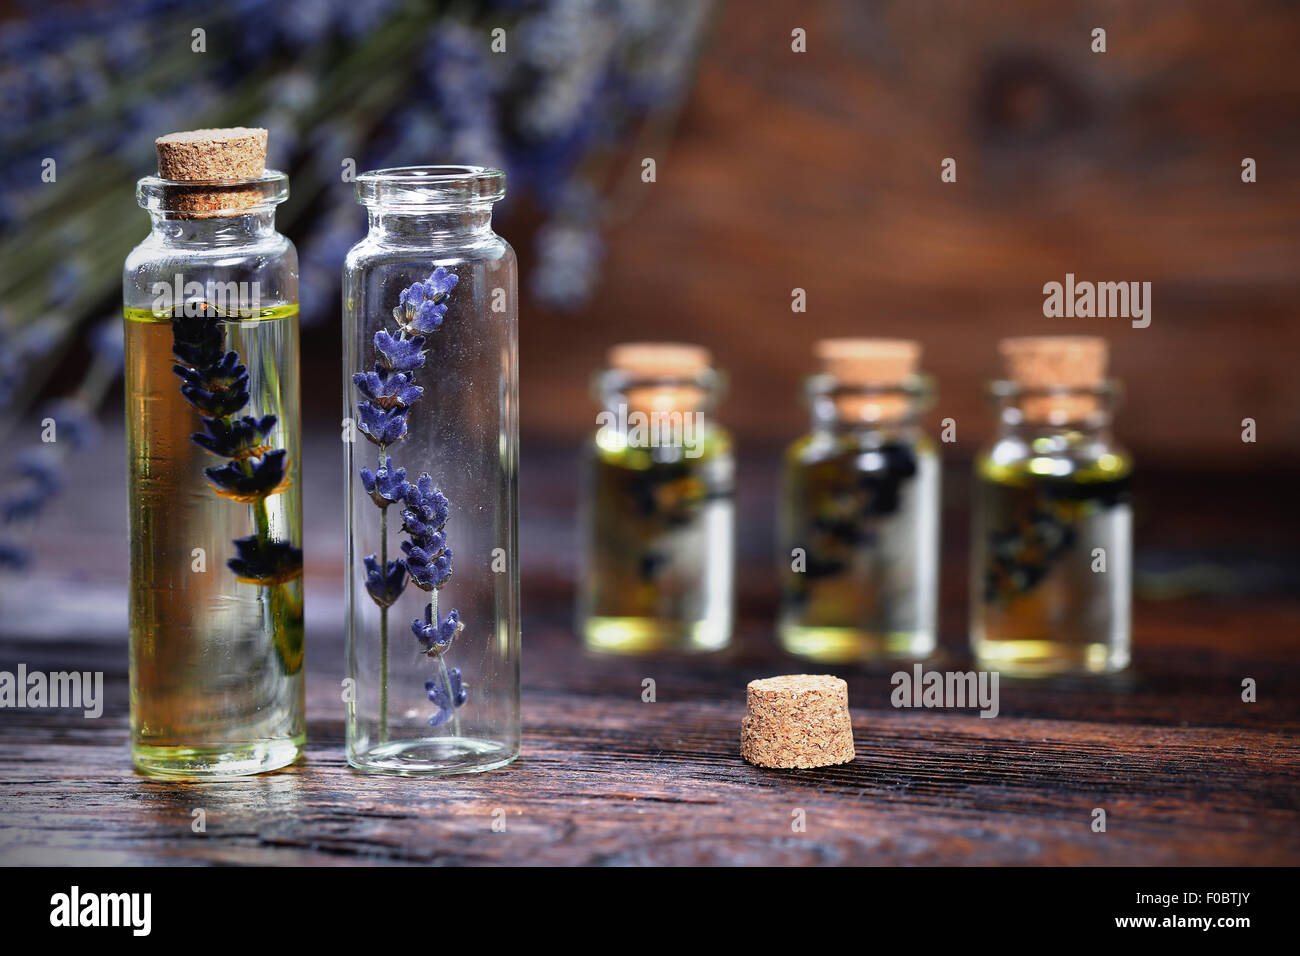 Lavender oil in a glass bottle on a wooden table Stock Photo